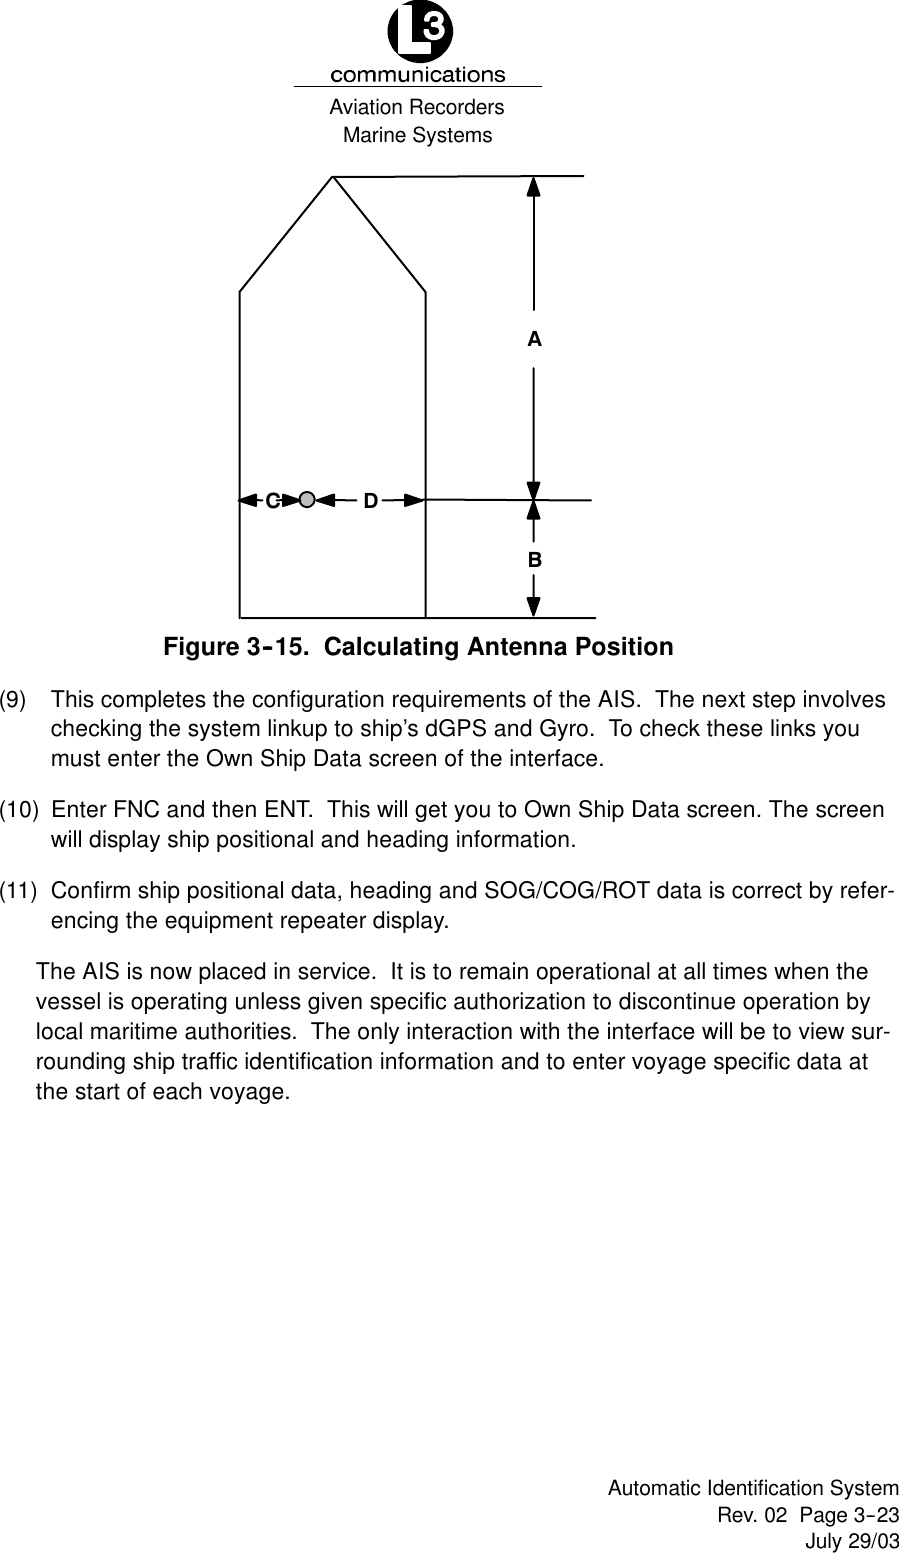 Marine SystemsAviation RecordersRev. 02 Page 3--23July 29/03Automatic Identification SystemABCDFigure 3--15. Calculating Antenna Position(9) This completes the configuration requirements of the AIS. The next step involveschecking the system linkup to ship’s dGPS and Gyro. To check these links youmust enter the Own Ship Data screen of the interface.(10) Enter FNC and then ENT. This will get you to Own Ship Data screen. The screenwill display ship positional and heading information.(11) Confirm ship positional data, heading and SOG/COG/ROT data is correct by refer-encing the equipment repeater display.The AIS is now placed in service. It is to remain operational at all times when thevessel is operating unless given specific authorization to discontinue operation bylocal maritime authorities. The only interaction with the interface will be to view sur-rounding ship traffic identification information and to enter voyage specific data atthe start of each voyage.